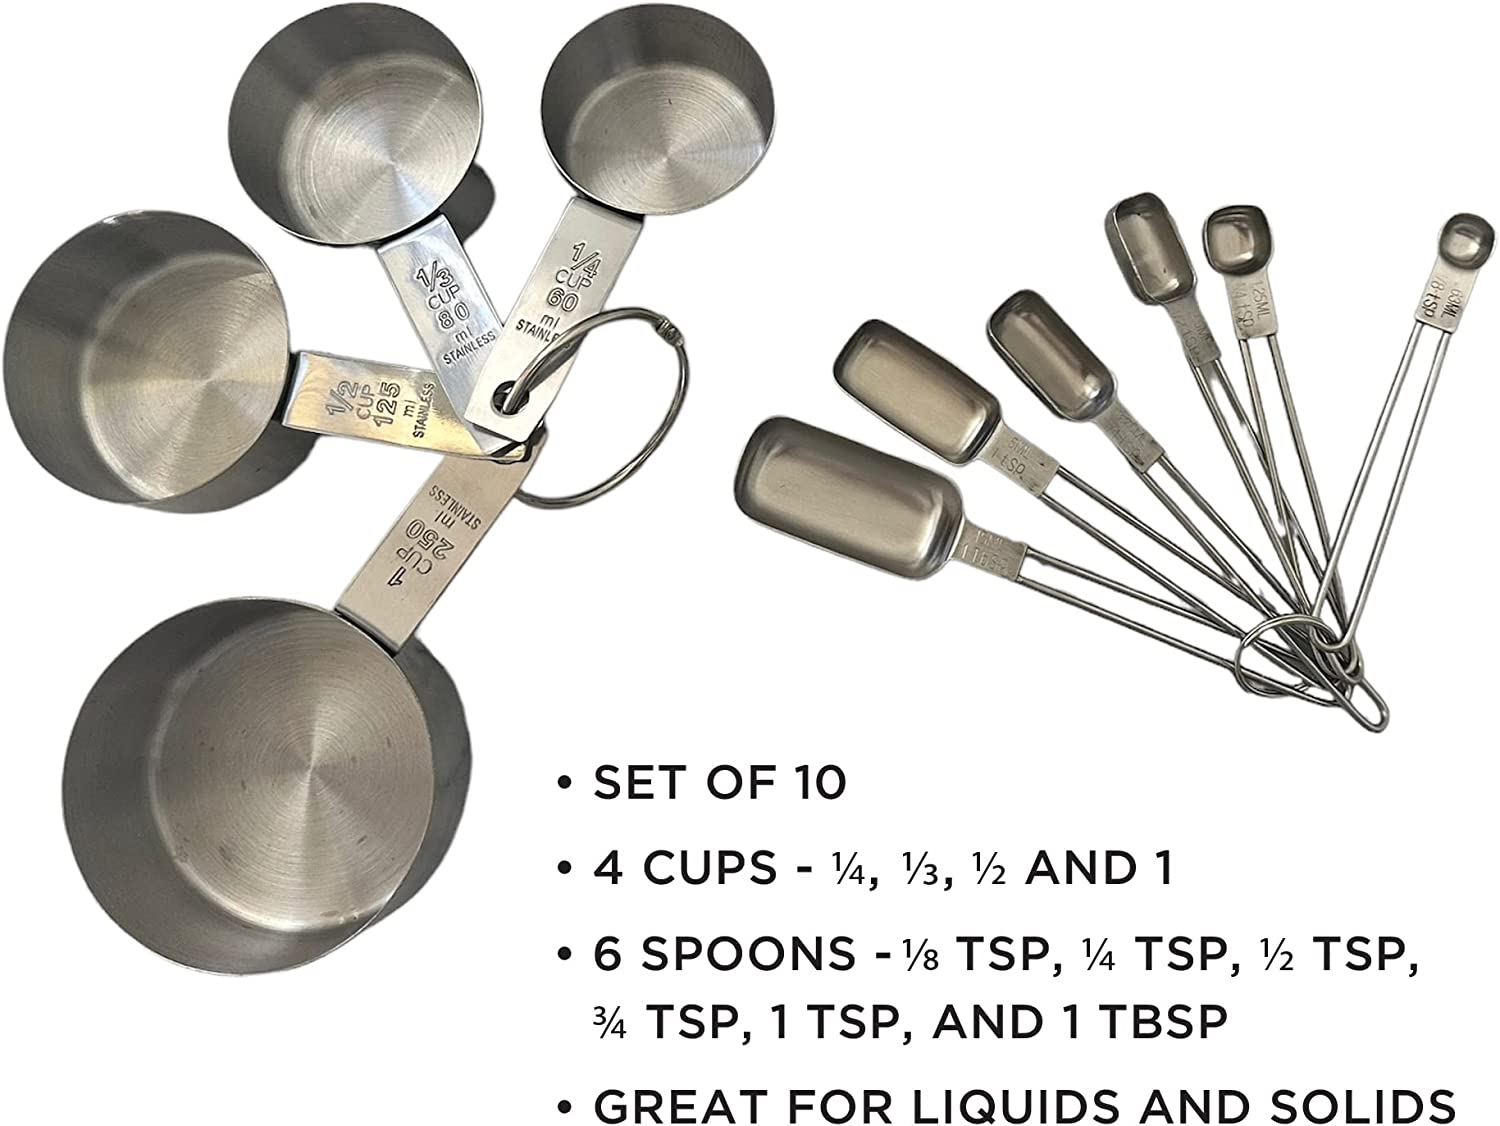 Precision Powder Stainless Steel Measuring Spoons Set